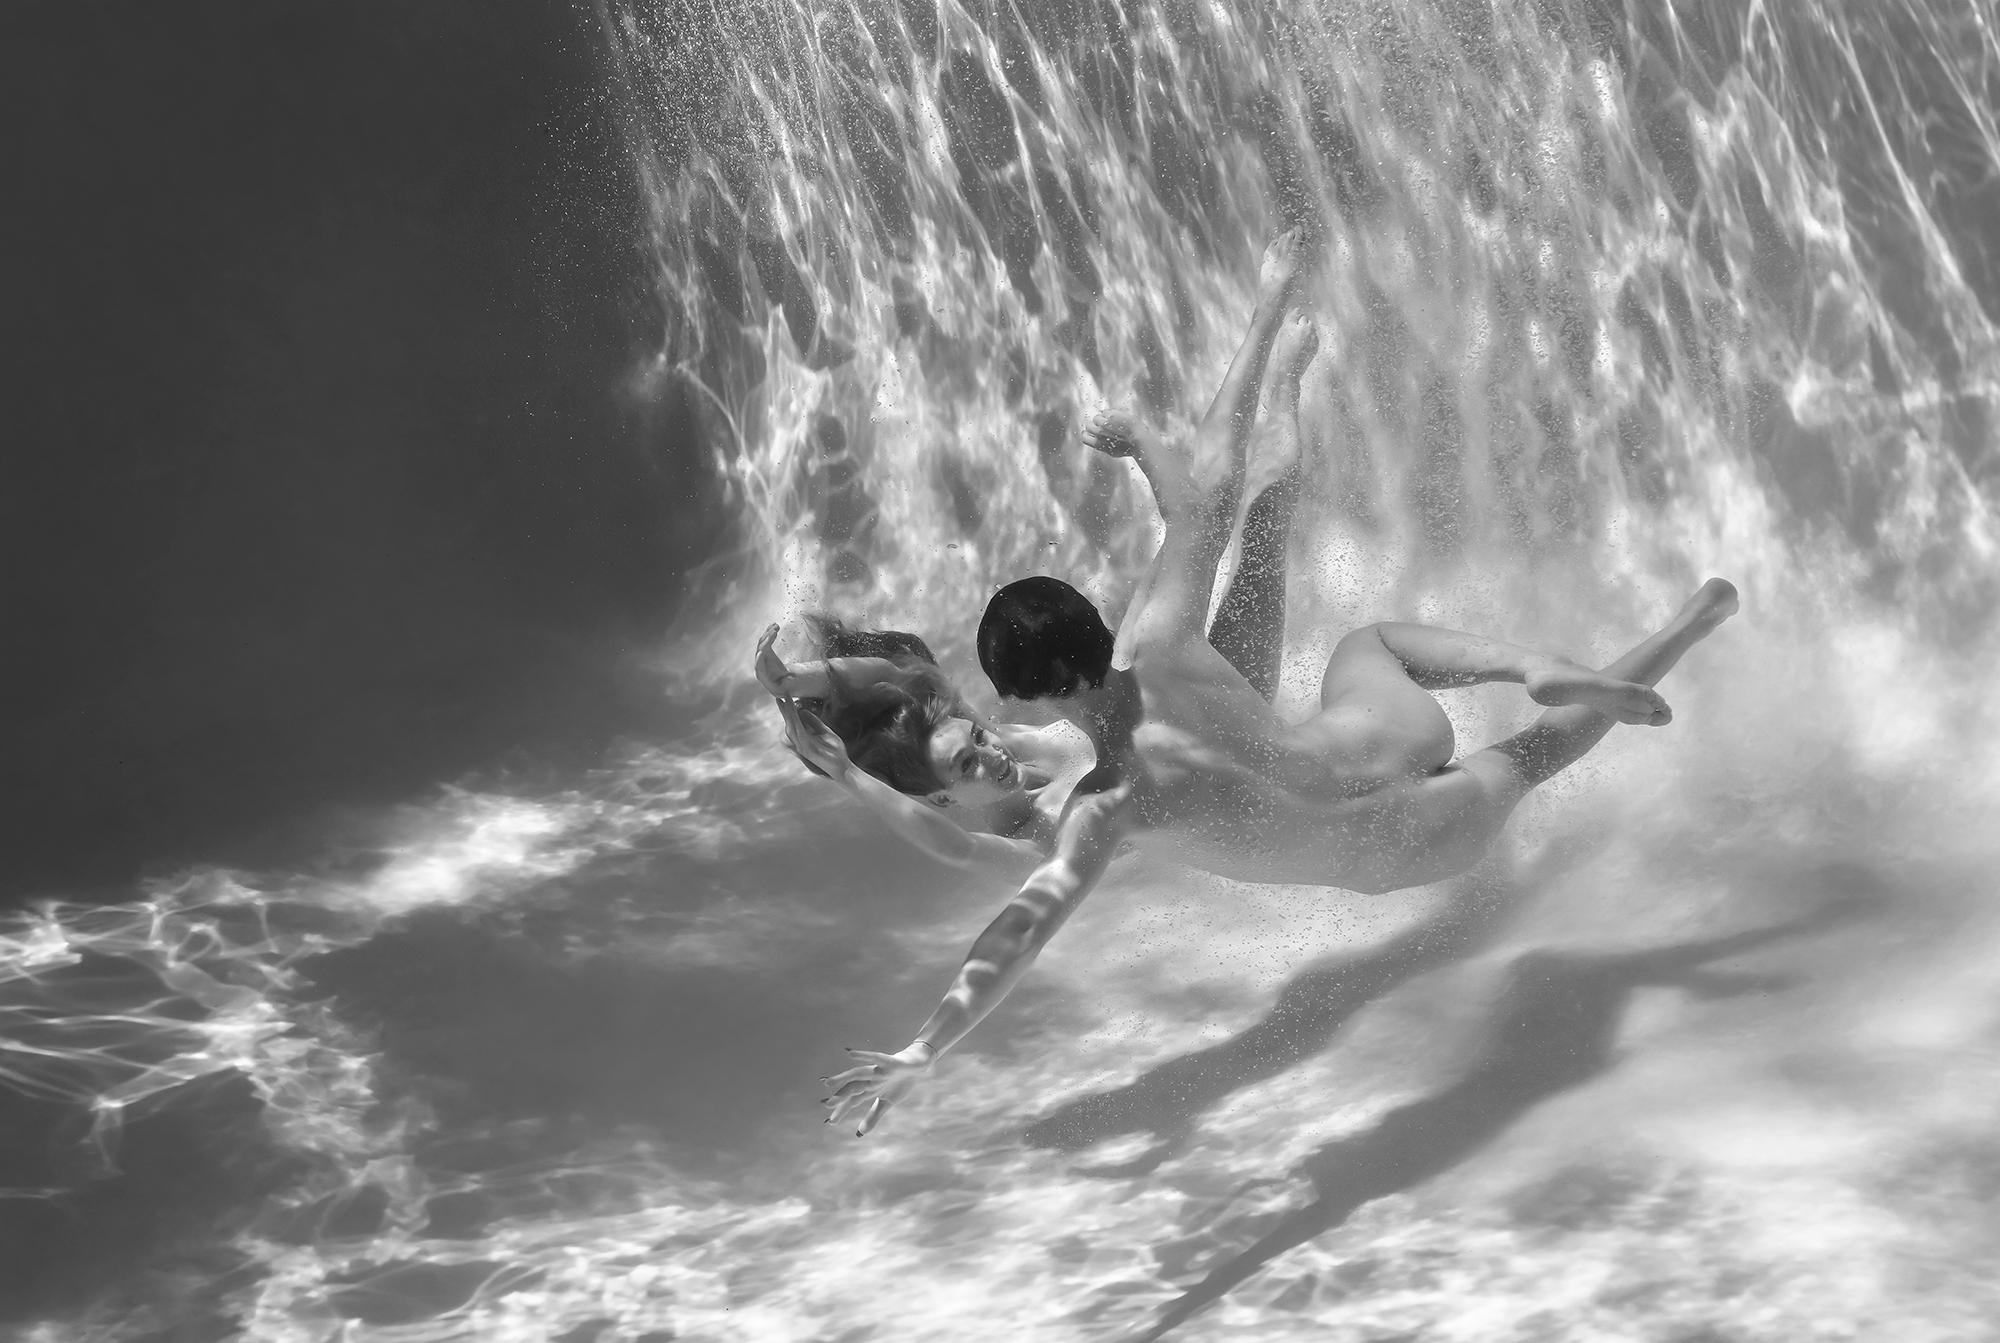 Alex Sher Black and White Photograph - Pool Party VII  - underwater black & white photograph - print on paper 16" x 24"